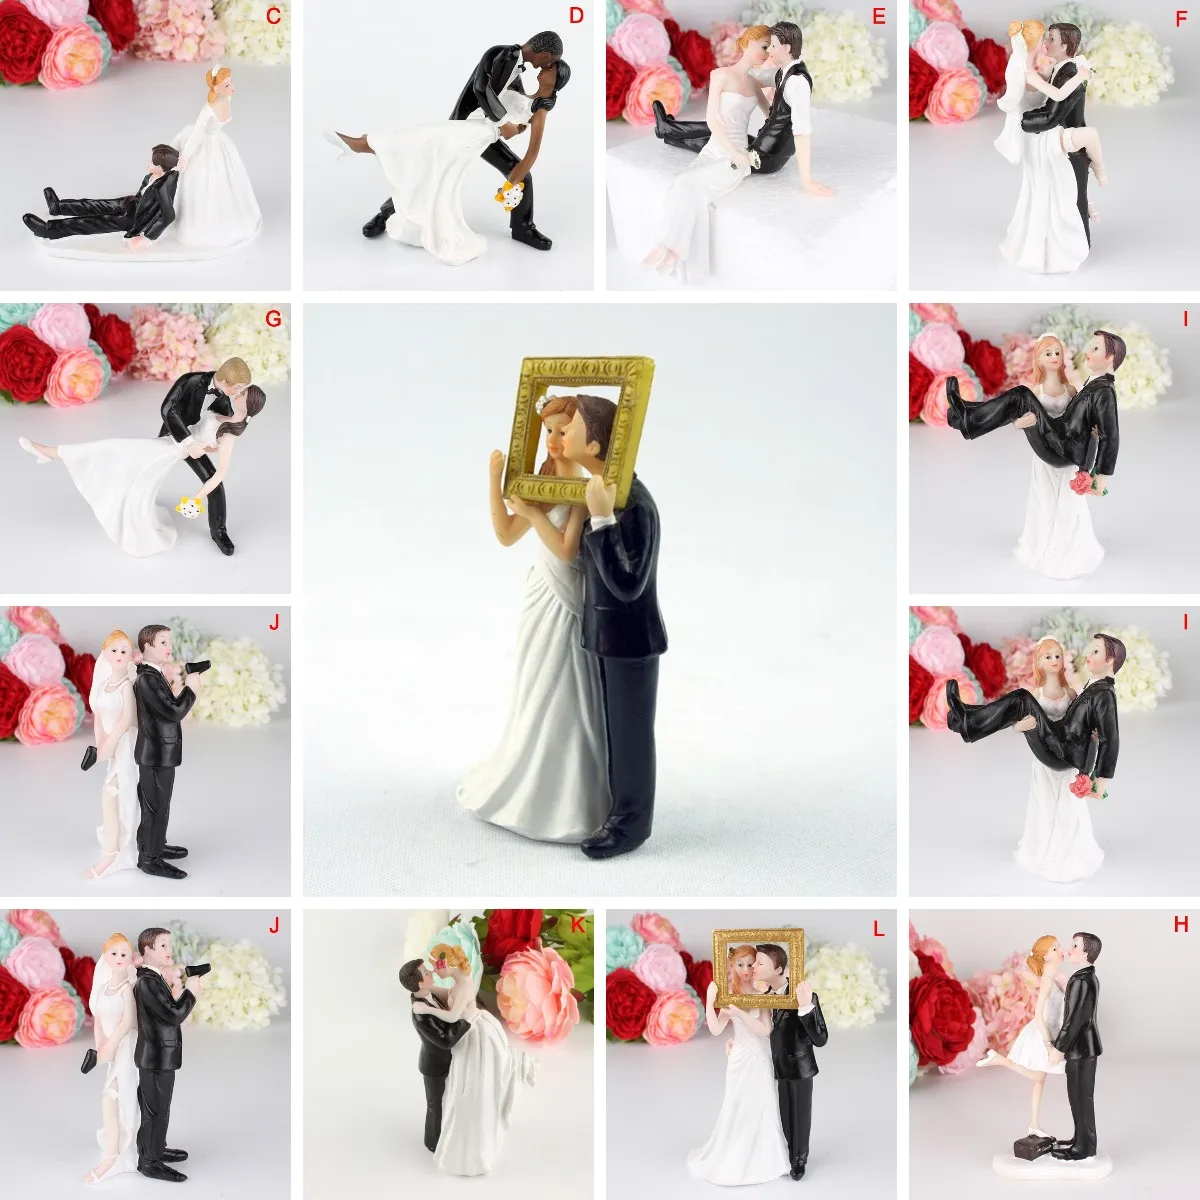 

Bride Groom Figurines Funny Sweet Wedding Cake Toppers Marry Figurine Dolls Stand Topper Decoration Resin Wedding Cake Ornament